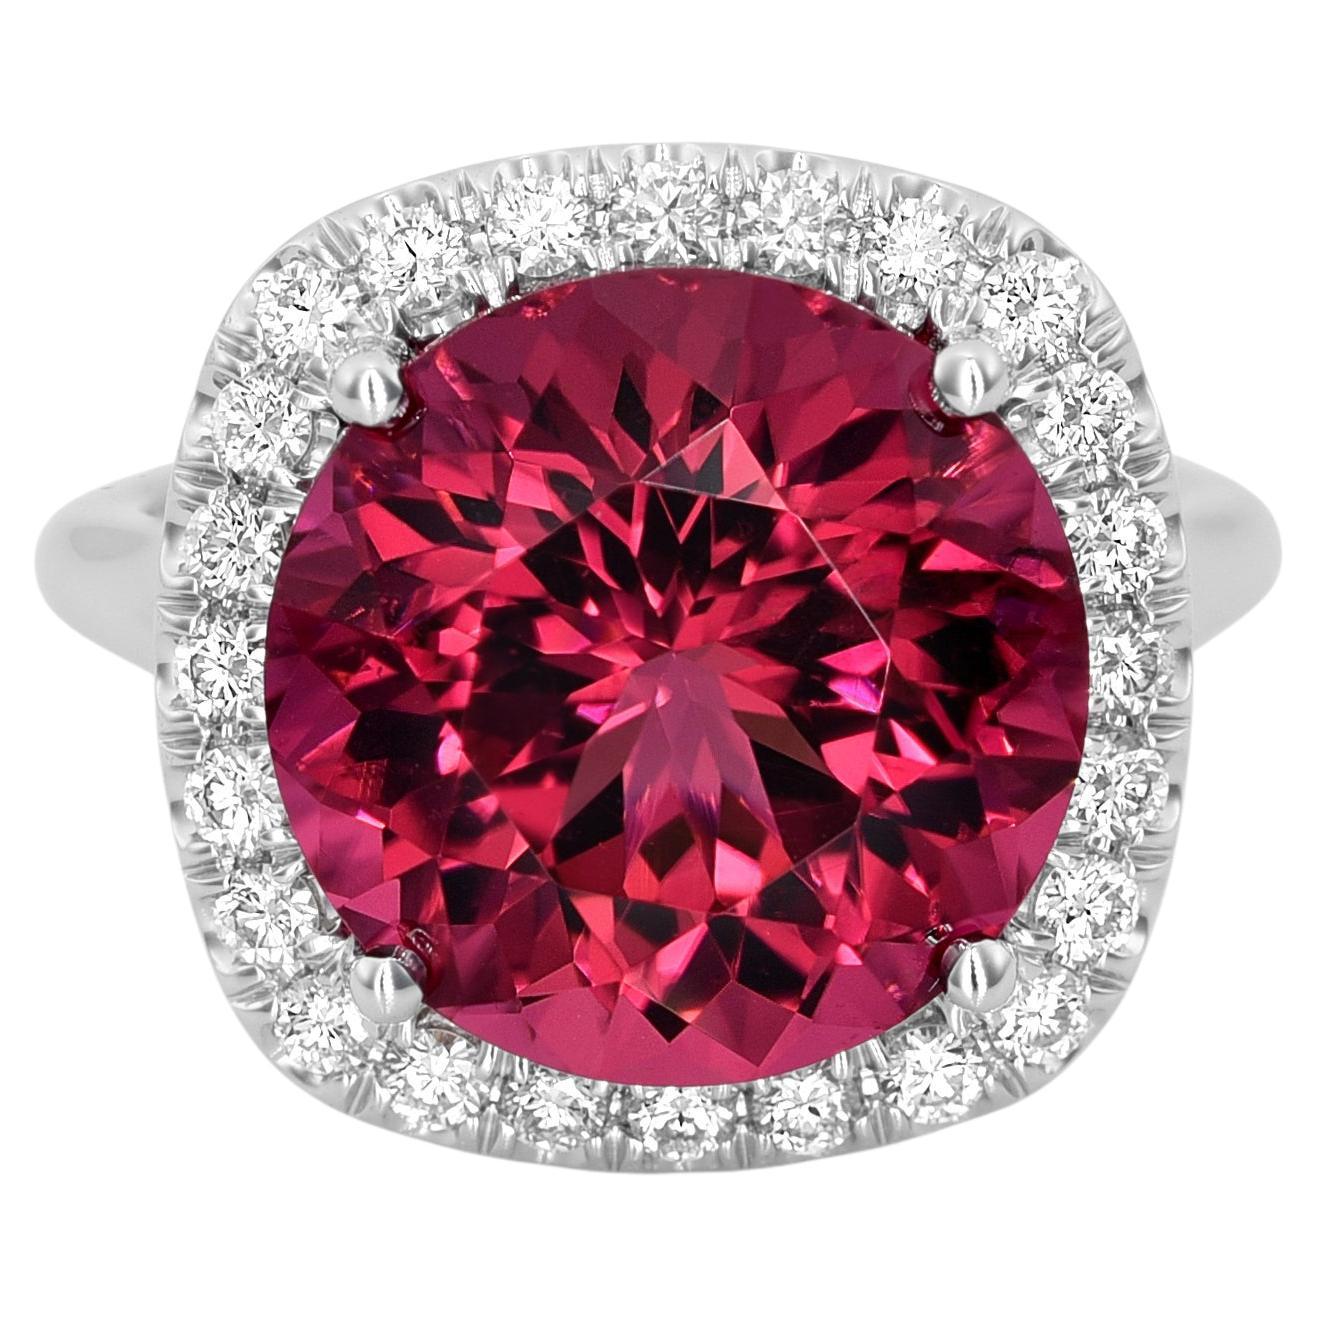 9.77 Carats Natural Red Tourmaline Diamonds set in 14K White Gold Ring For Sale